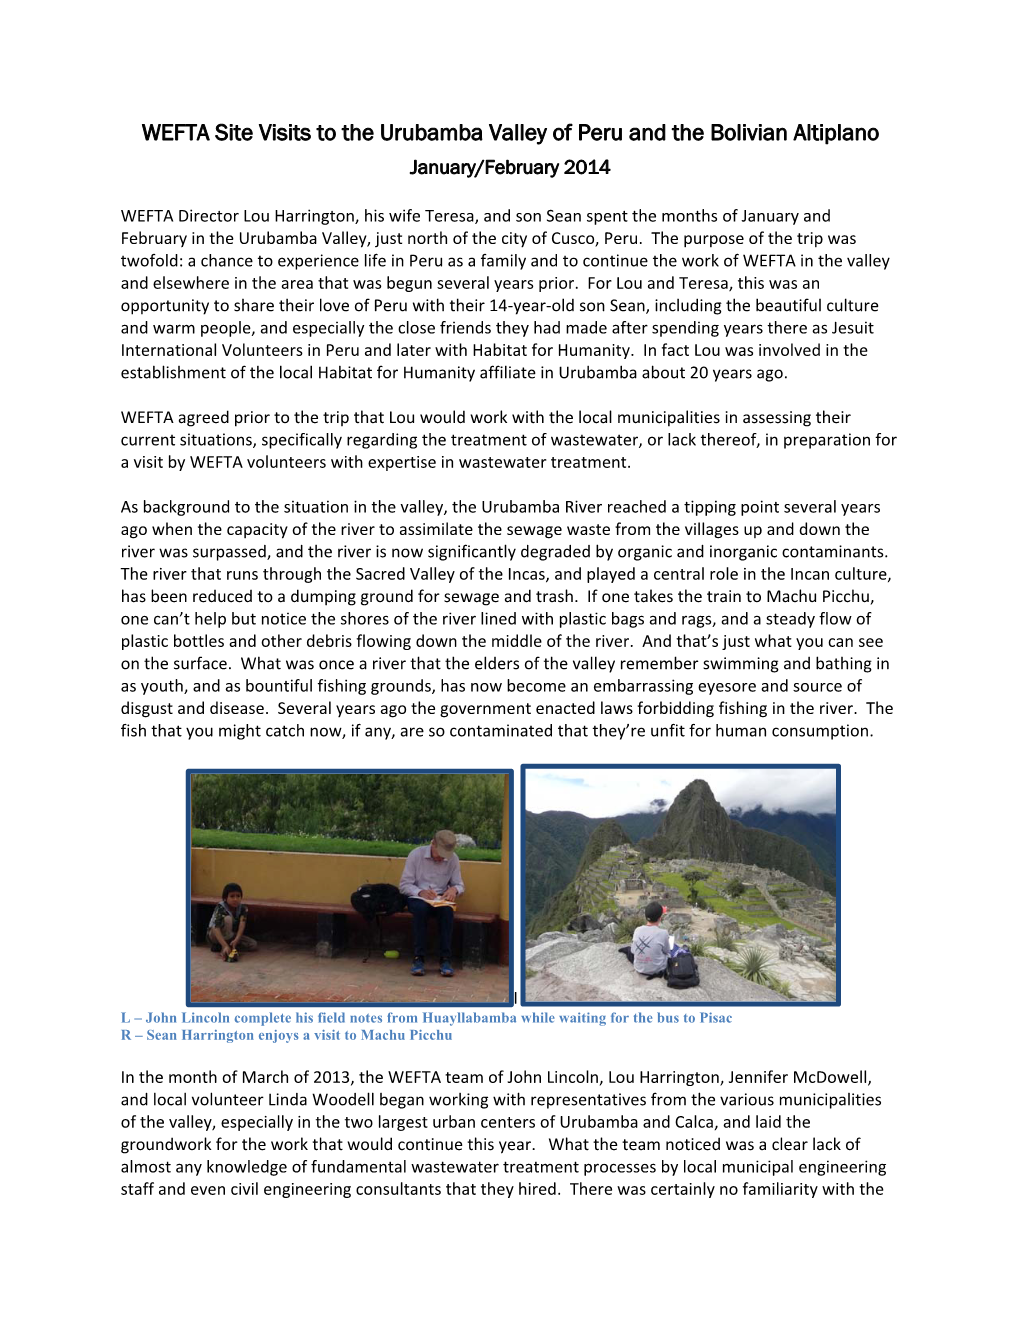 WEFTA Site Visits to the Urubamba Valley of Peru and the Bolivian Altiplano January/February 2014